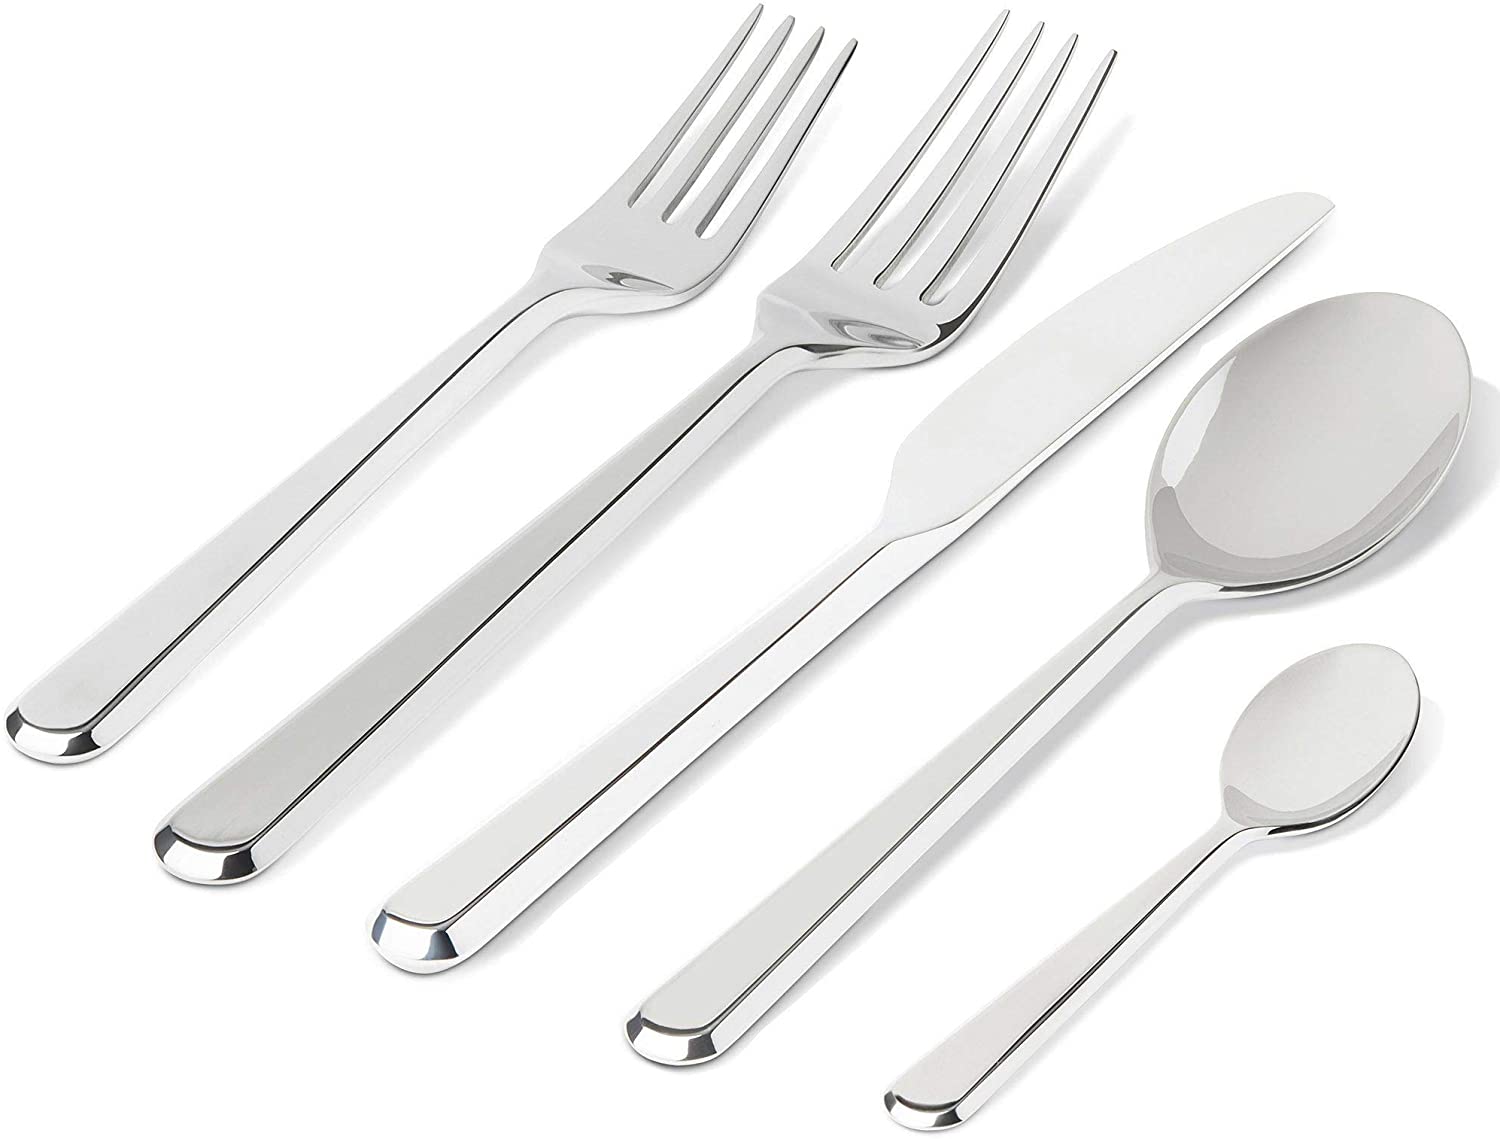 Alessi Amici 24-Piece Cutlery Set 5 Pieces Stainless Steel Shiny BG02S5 Design Big Game